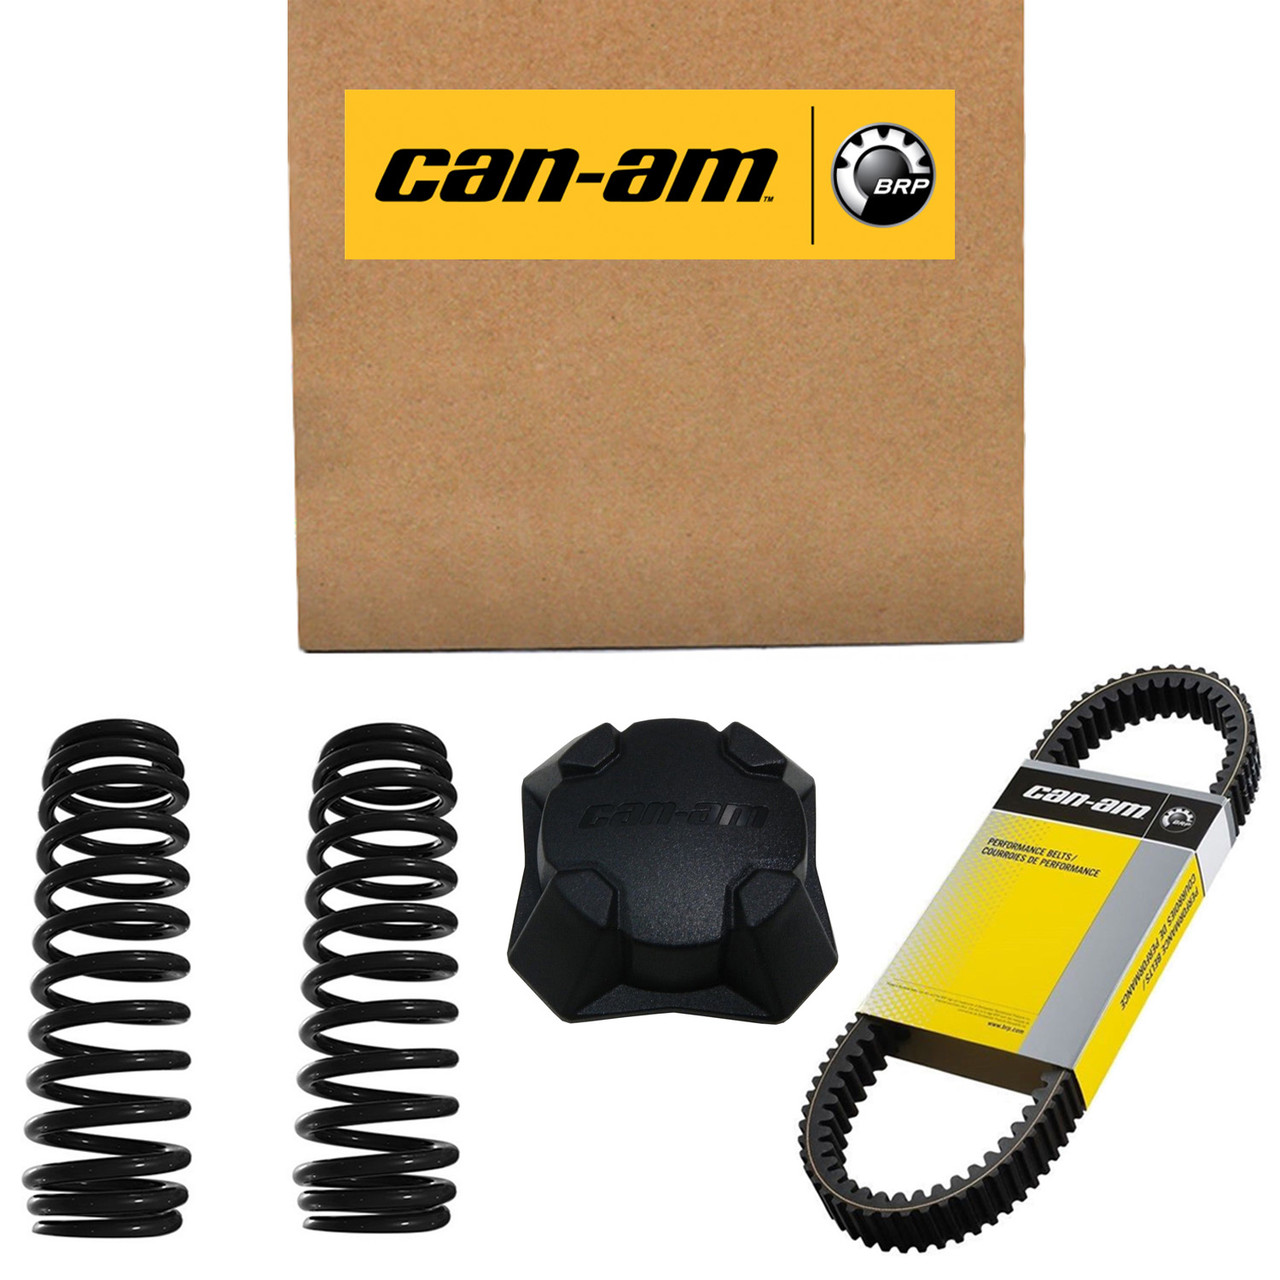 Can-Am New OEM Electronic Box, 420666719